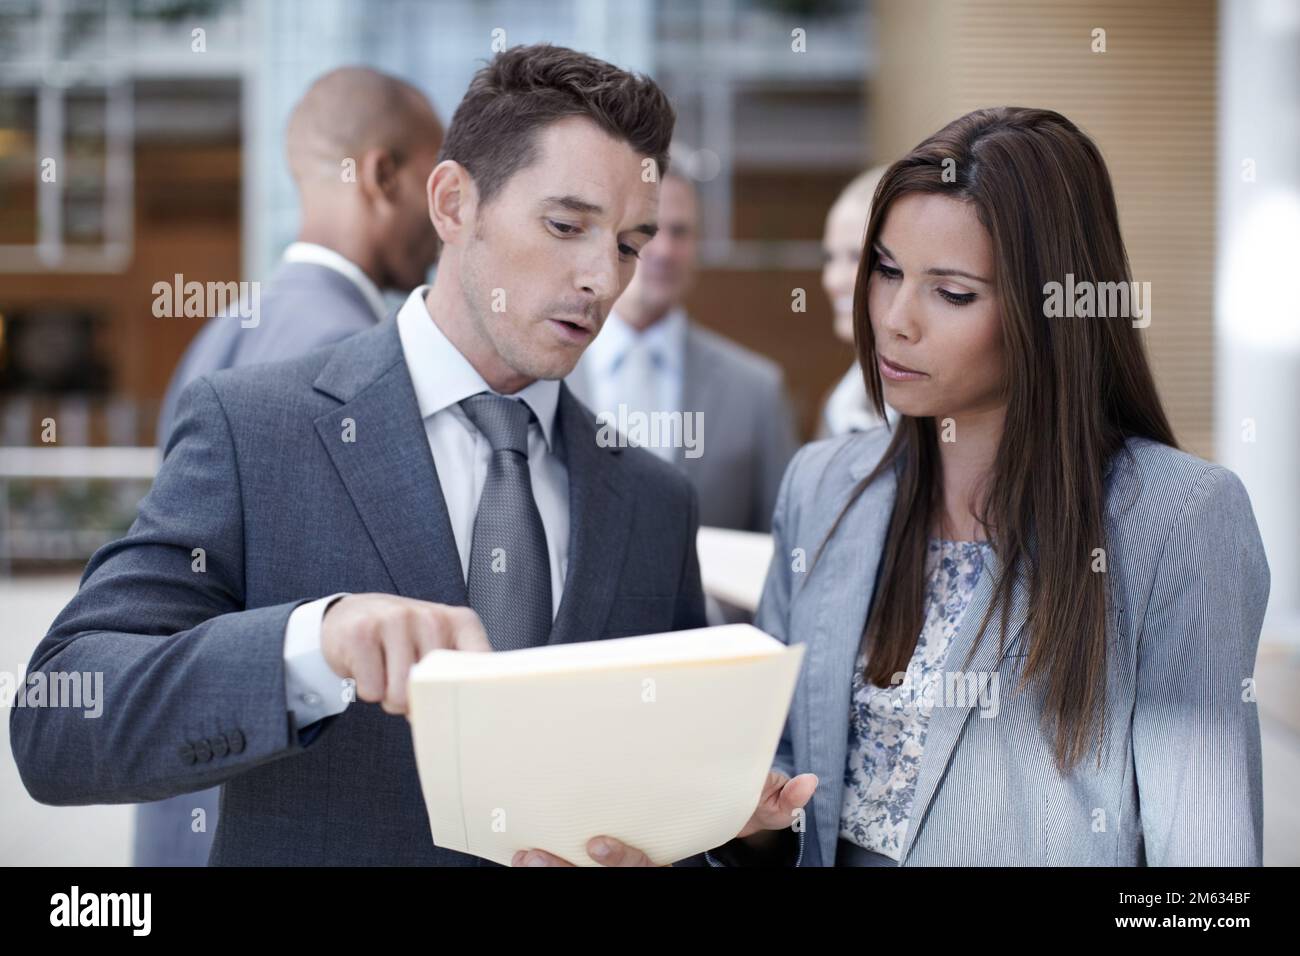 This cant be right. Two coworkers looking over paperwork together while looking serious. Stock Photo